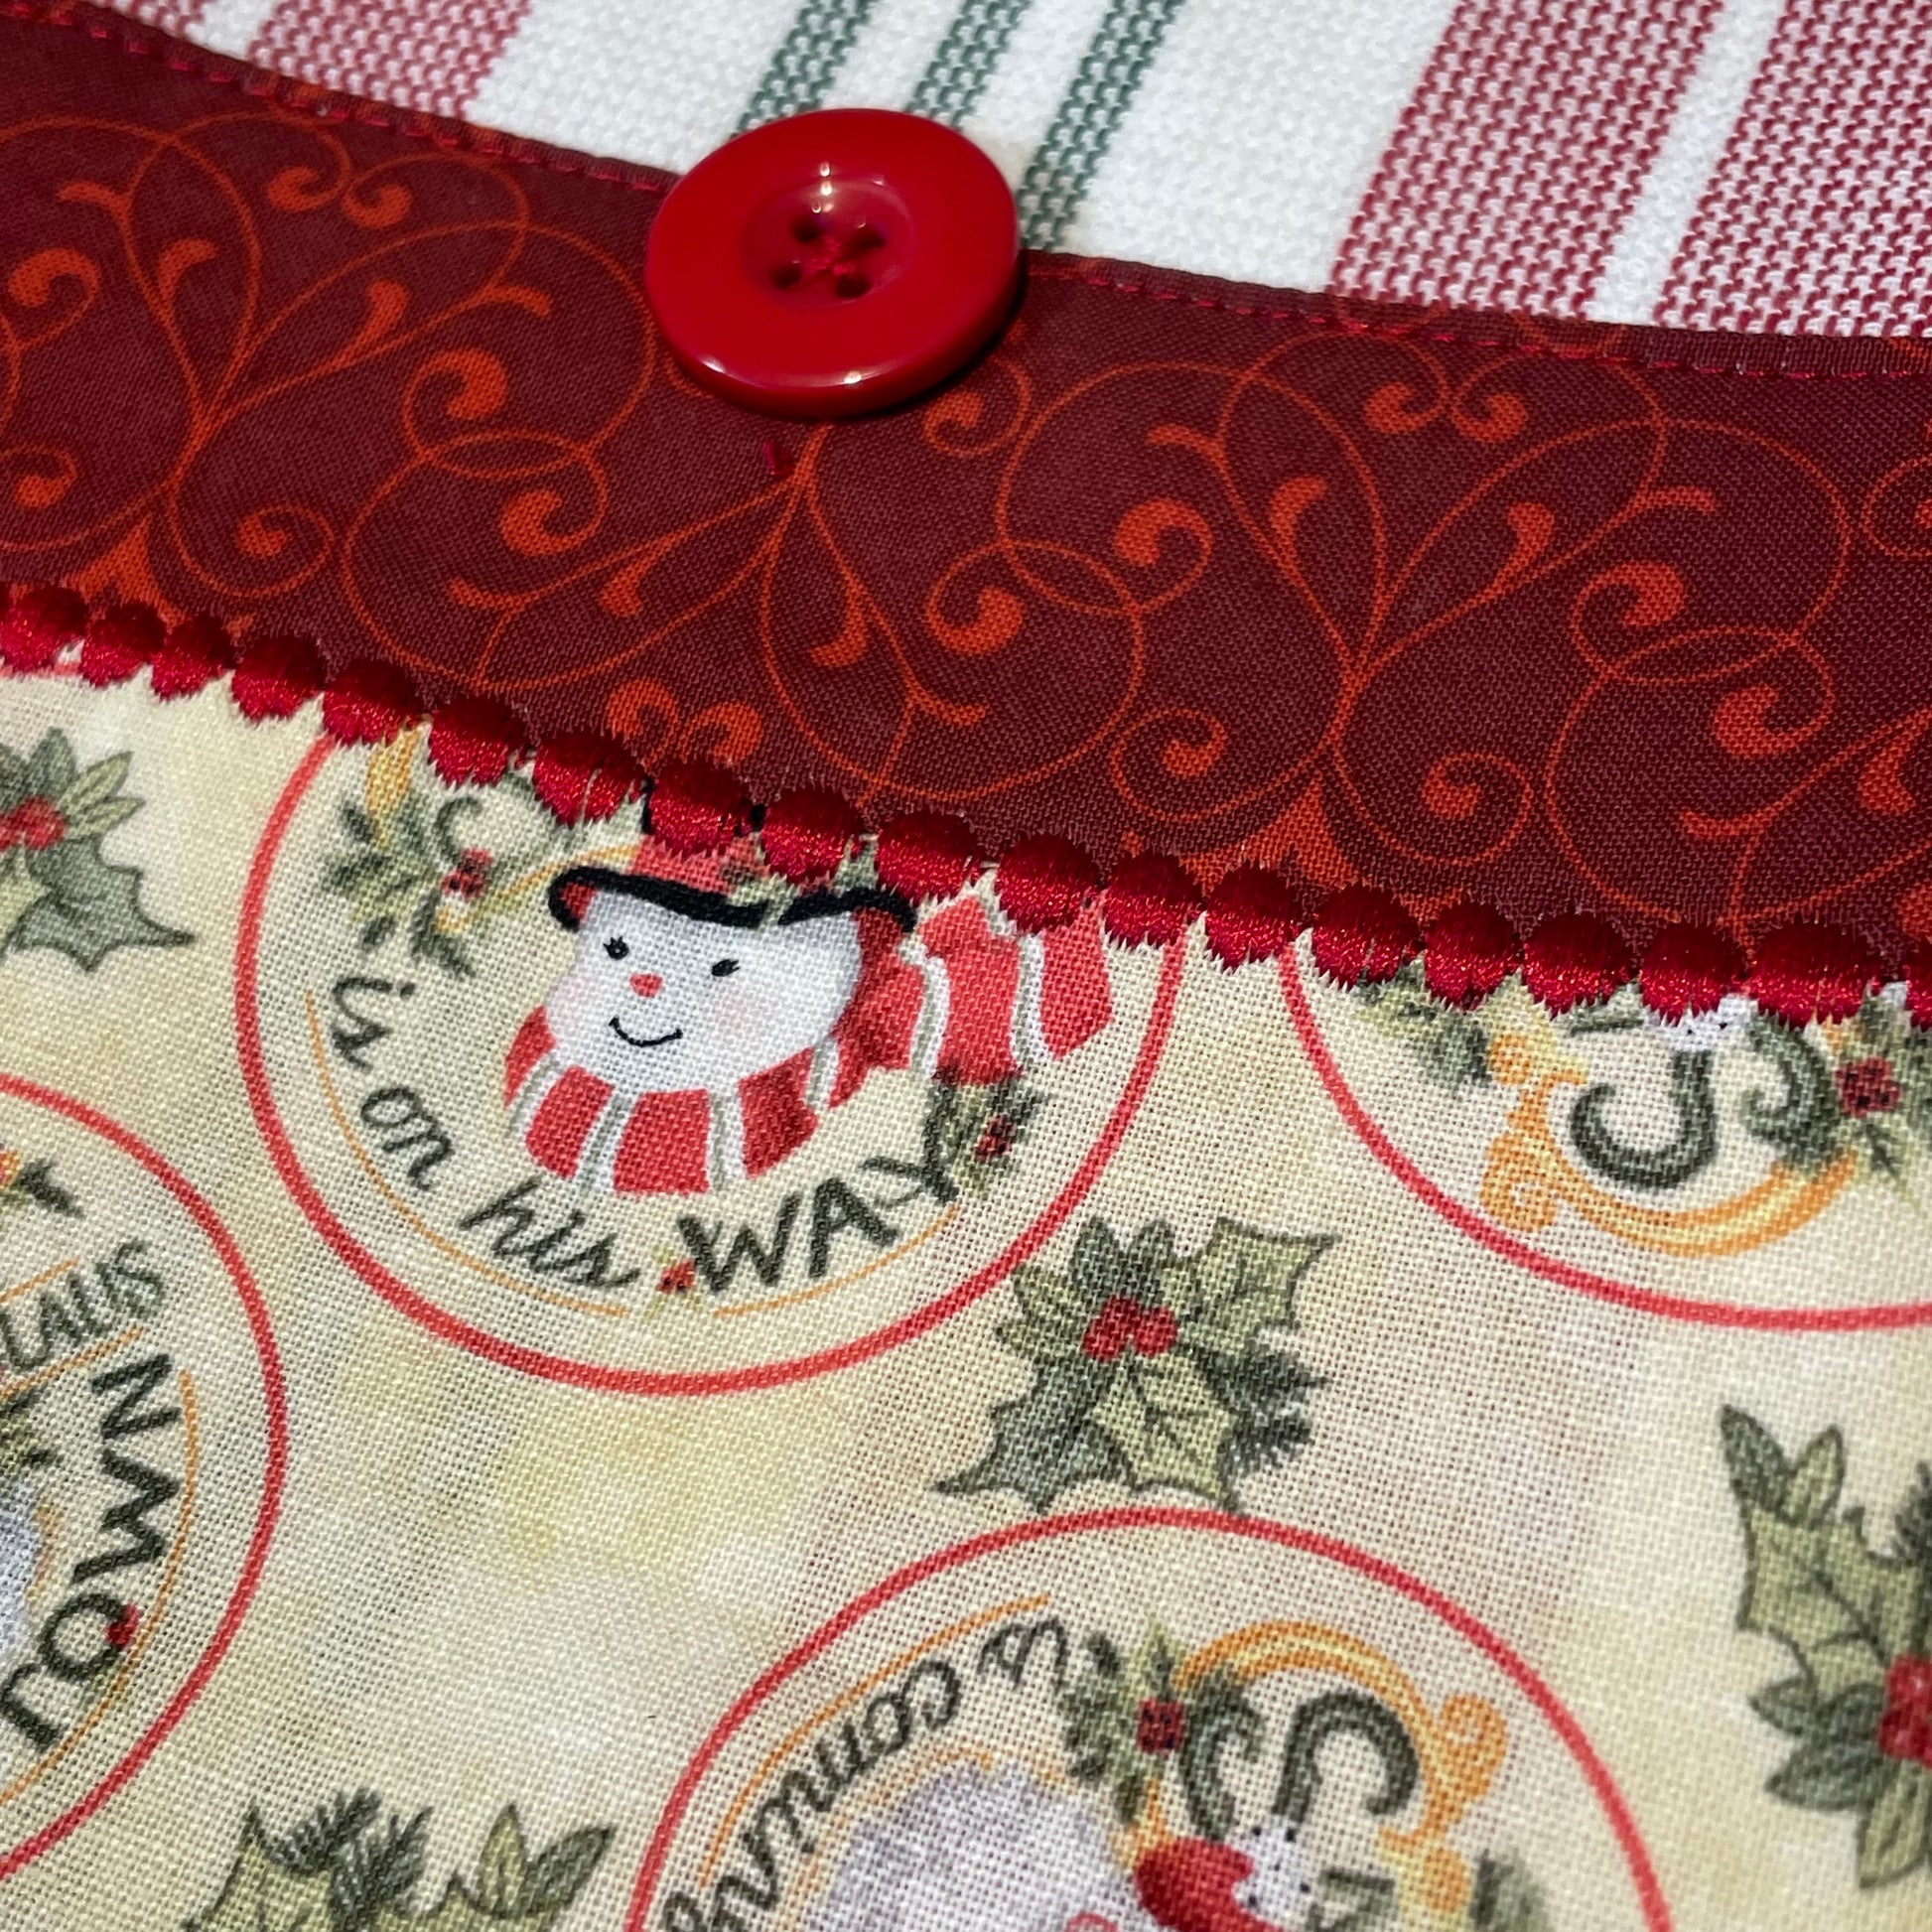 Retro Santas and Snowmen adorn this red Christmas Tea Towel. Handcrafted in Canada. Part of a mix and match collection of home decor. Shop the look at Home Stitchery Decor.